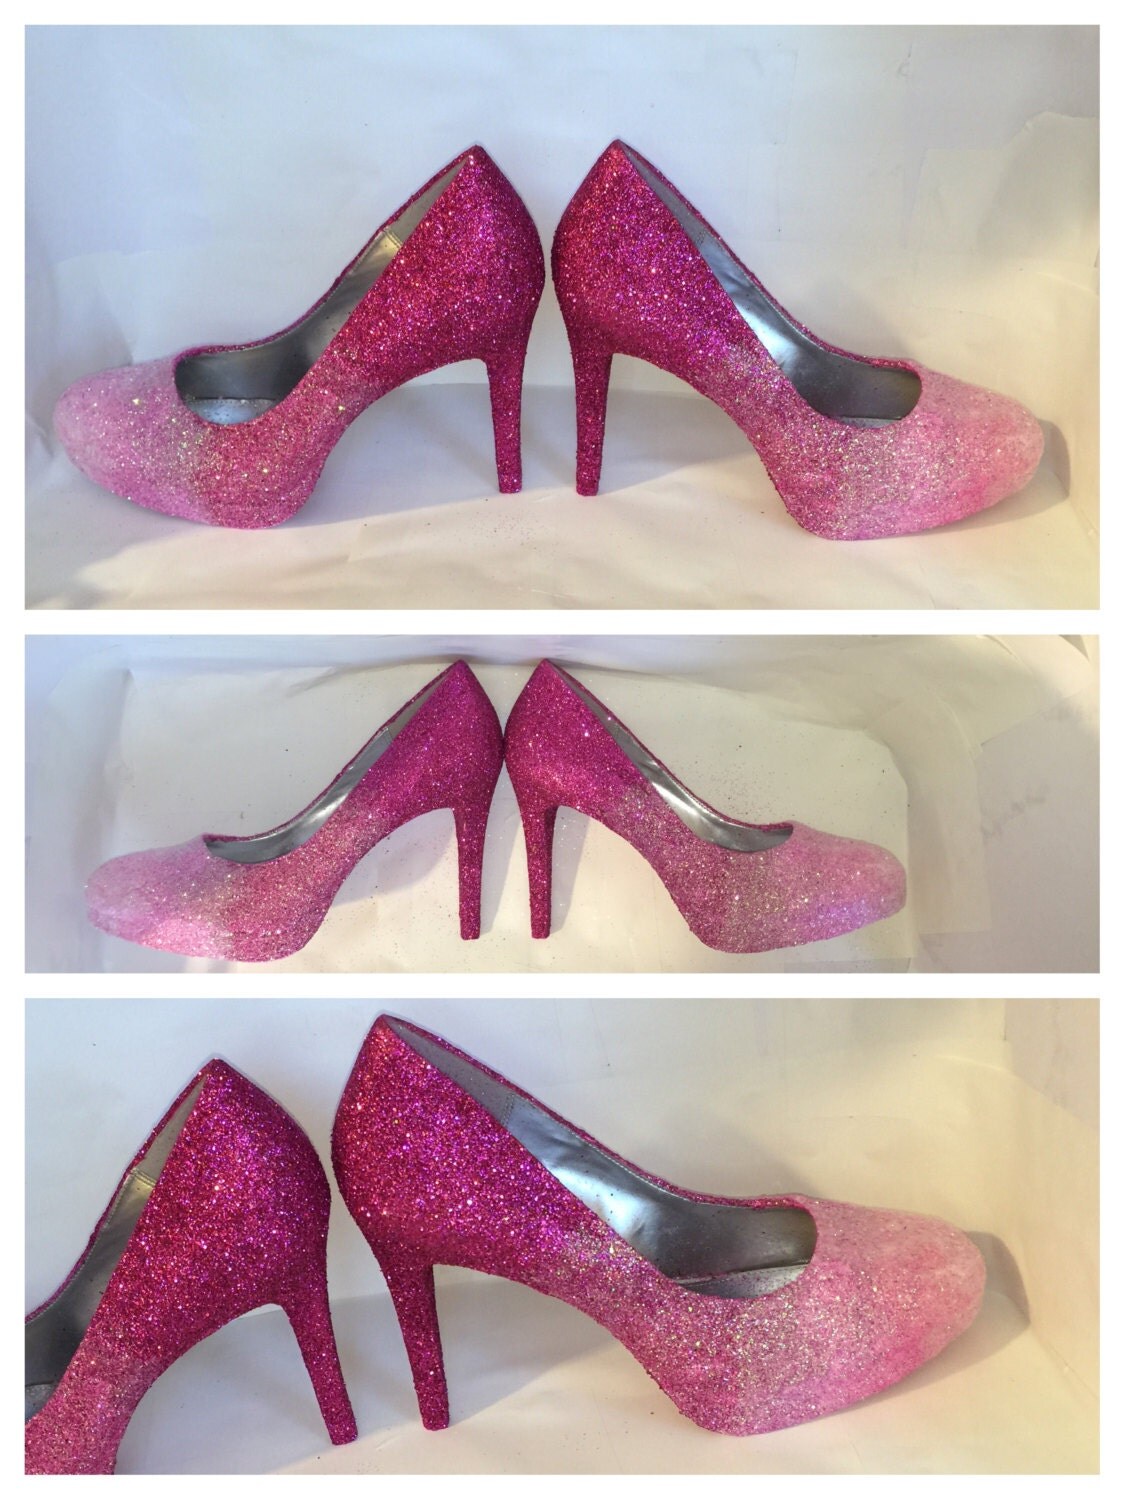 SPARKLY glitter ombre women's high or low heels by CrystalCleatss